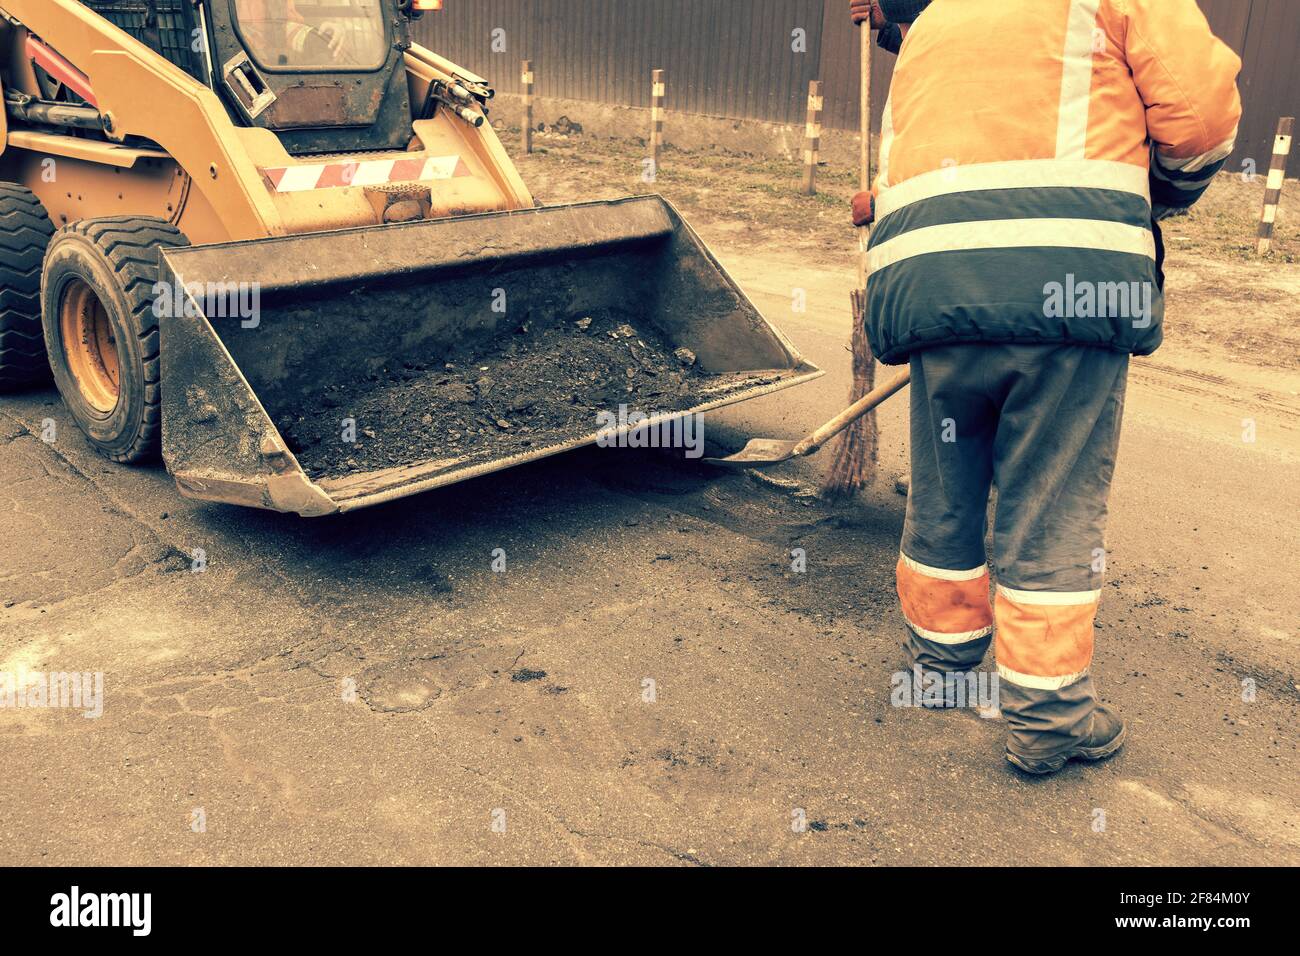 Road workers in bright orange reflective uniforms use shovels to scrape accumulated sand. maintenance of road and highway pavements. pothole repairing Stock Photo